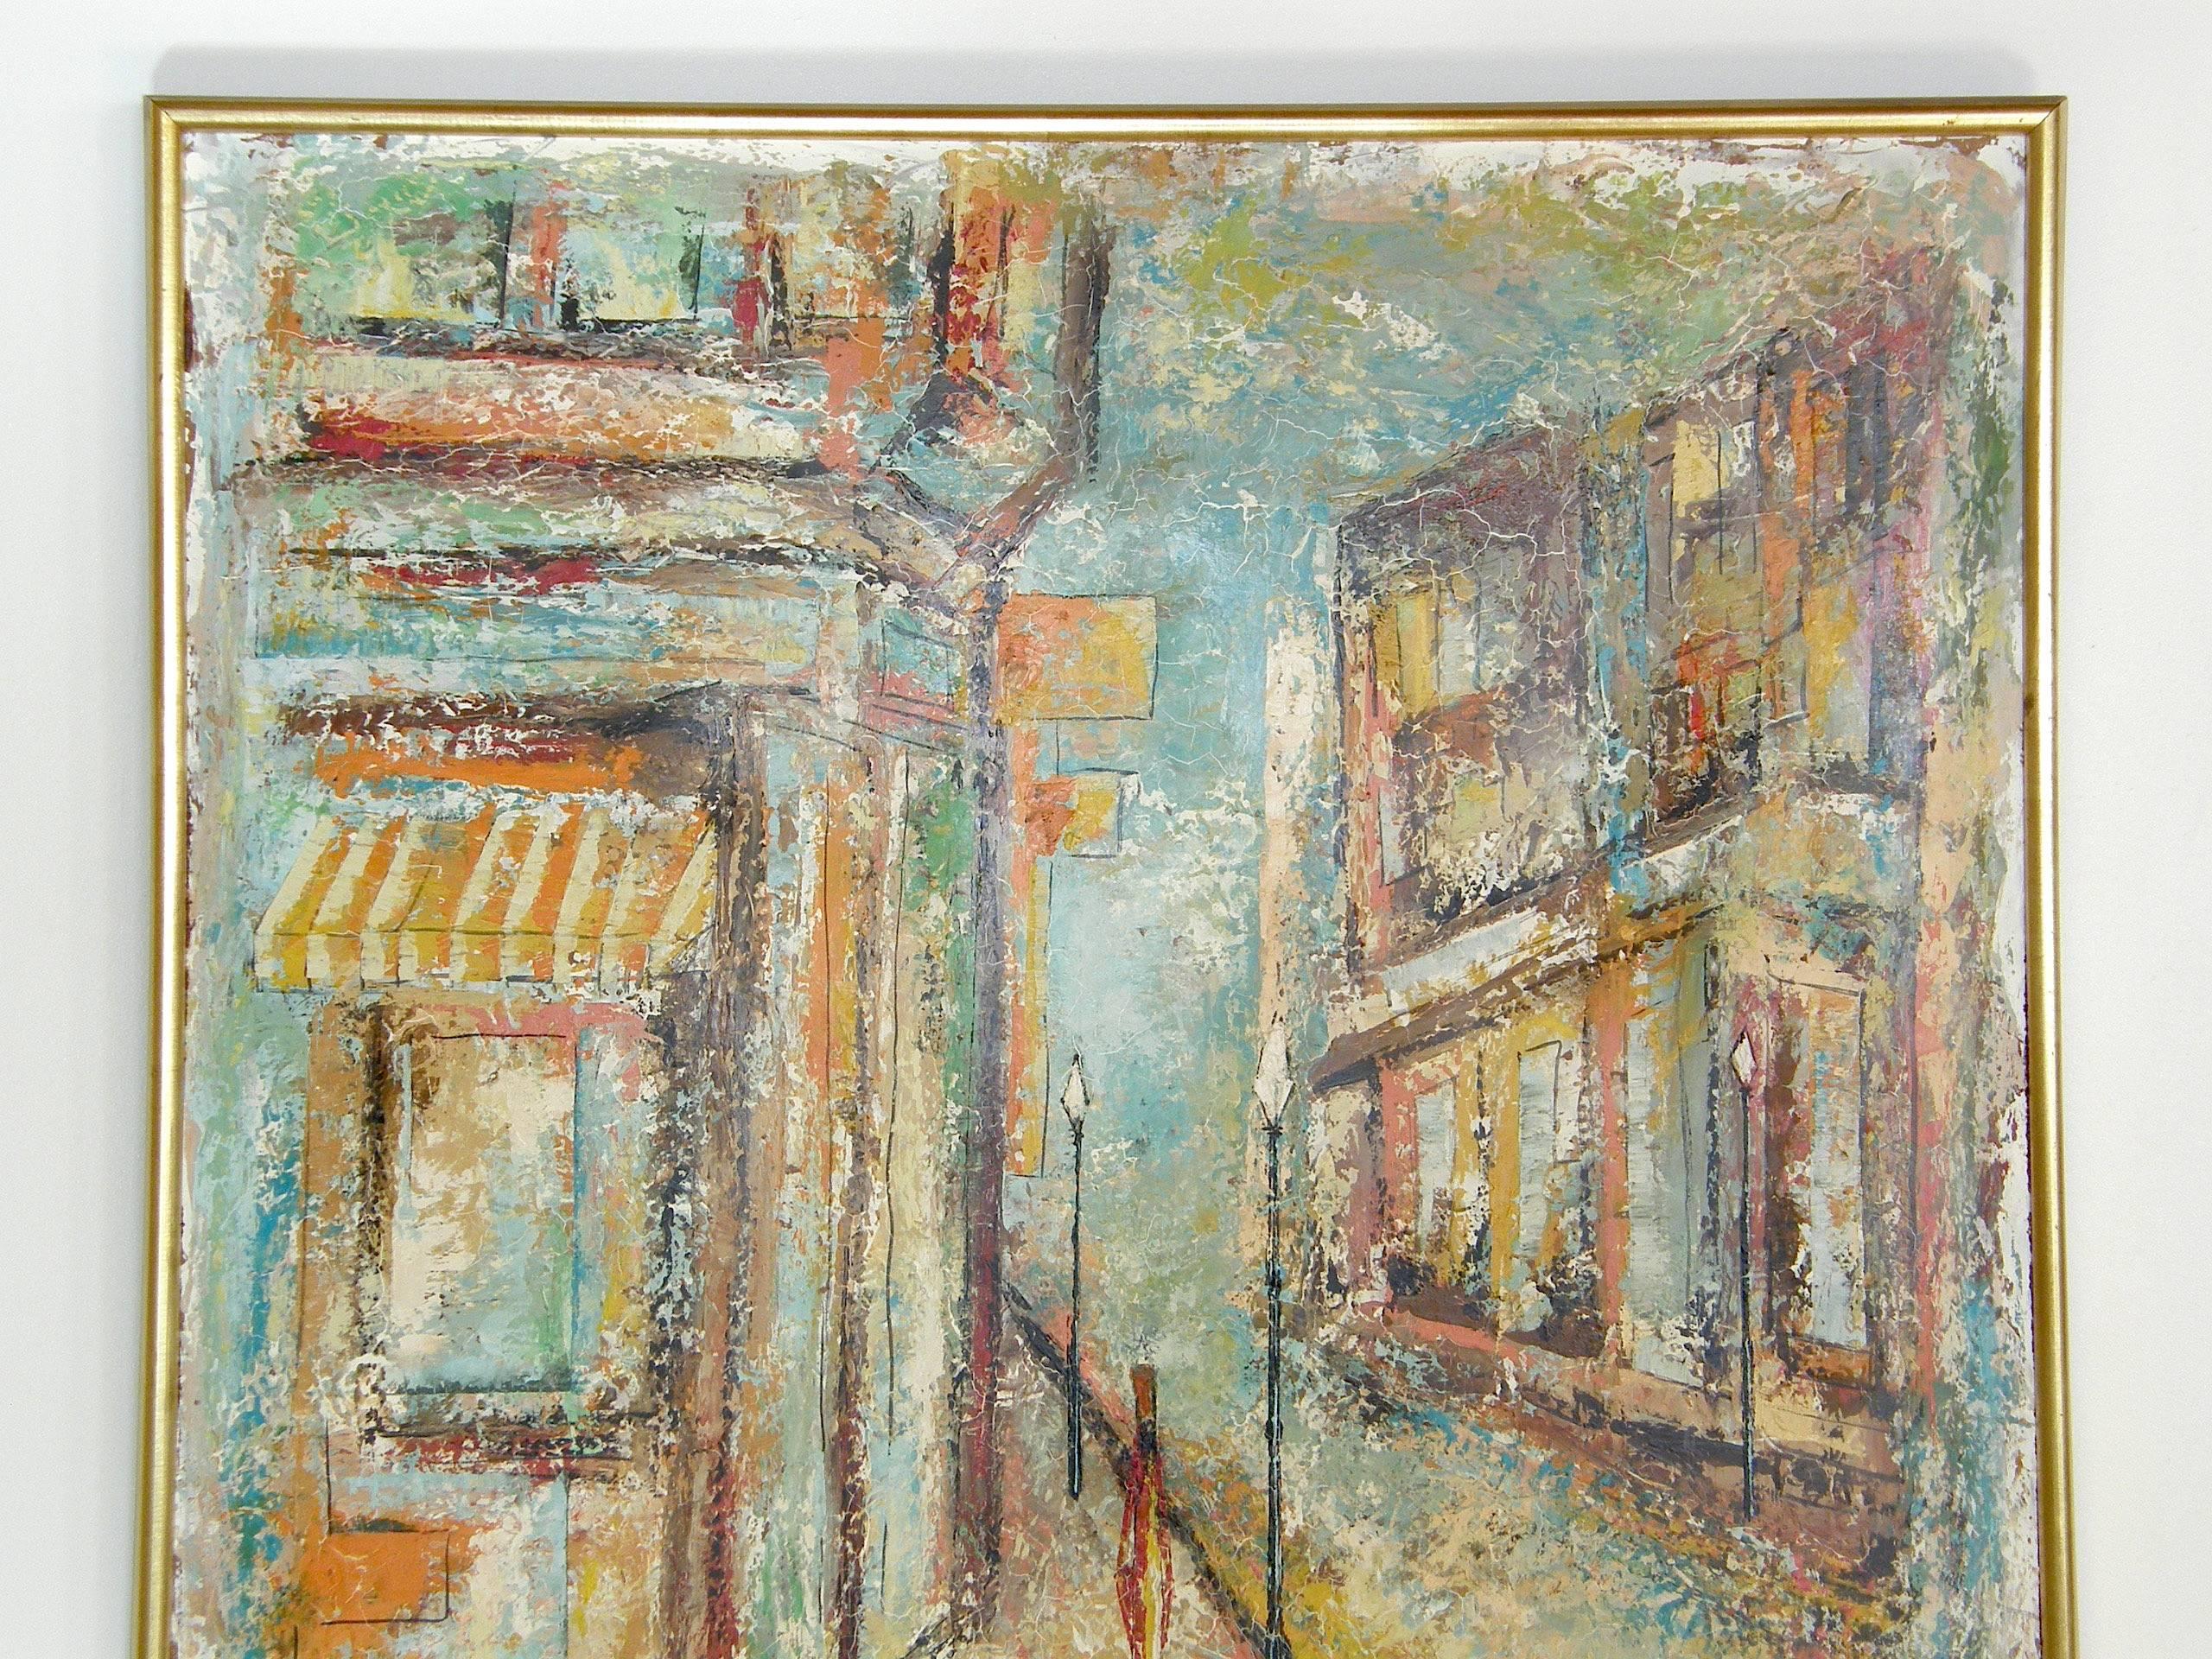 Abstract street corner scene painting of the French quarter in New Orleans, painted on recycled board by Chicago artist, William McBride, Jr. 

McBride was born in 1912 in New Orleans. His parents, who were vaudeville performers, moved their family